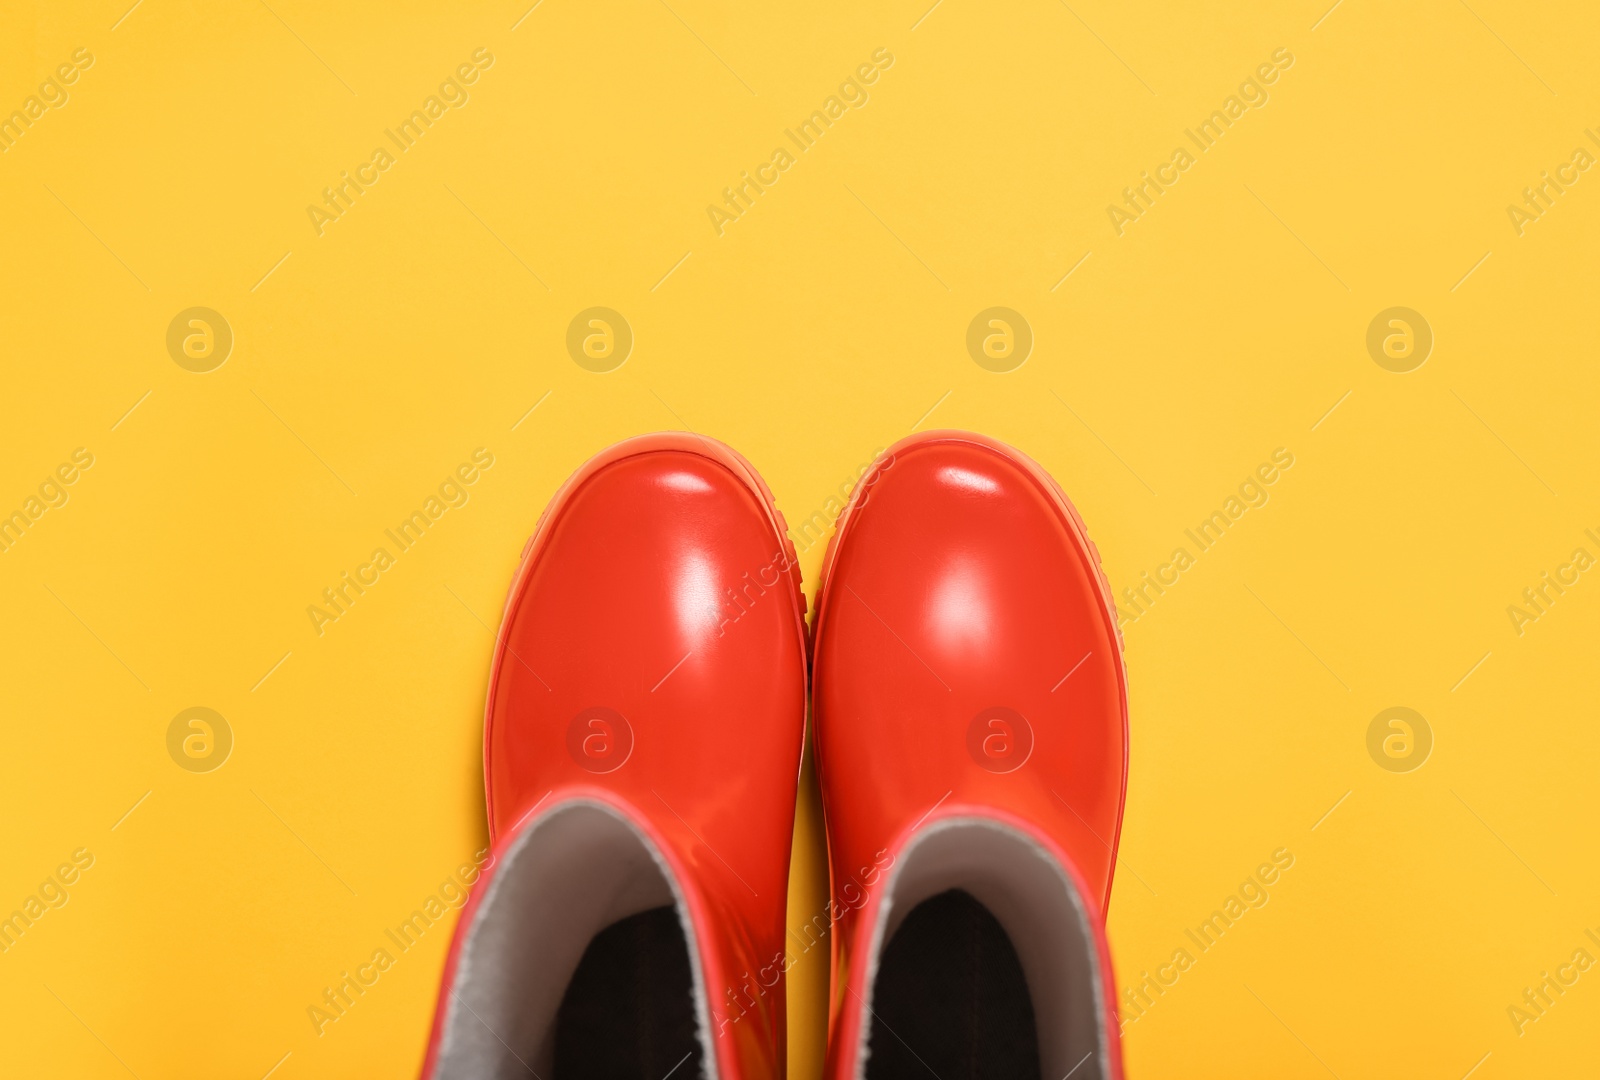 Photo of Red rubber boots on orange background, top view